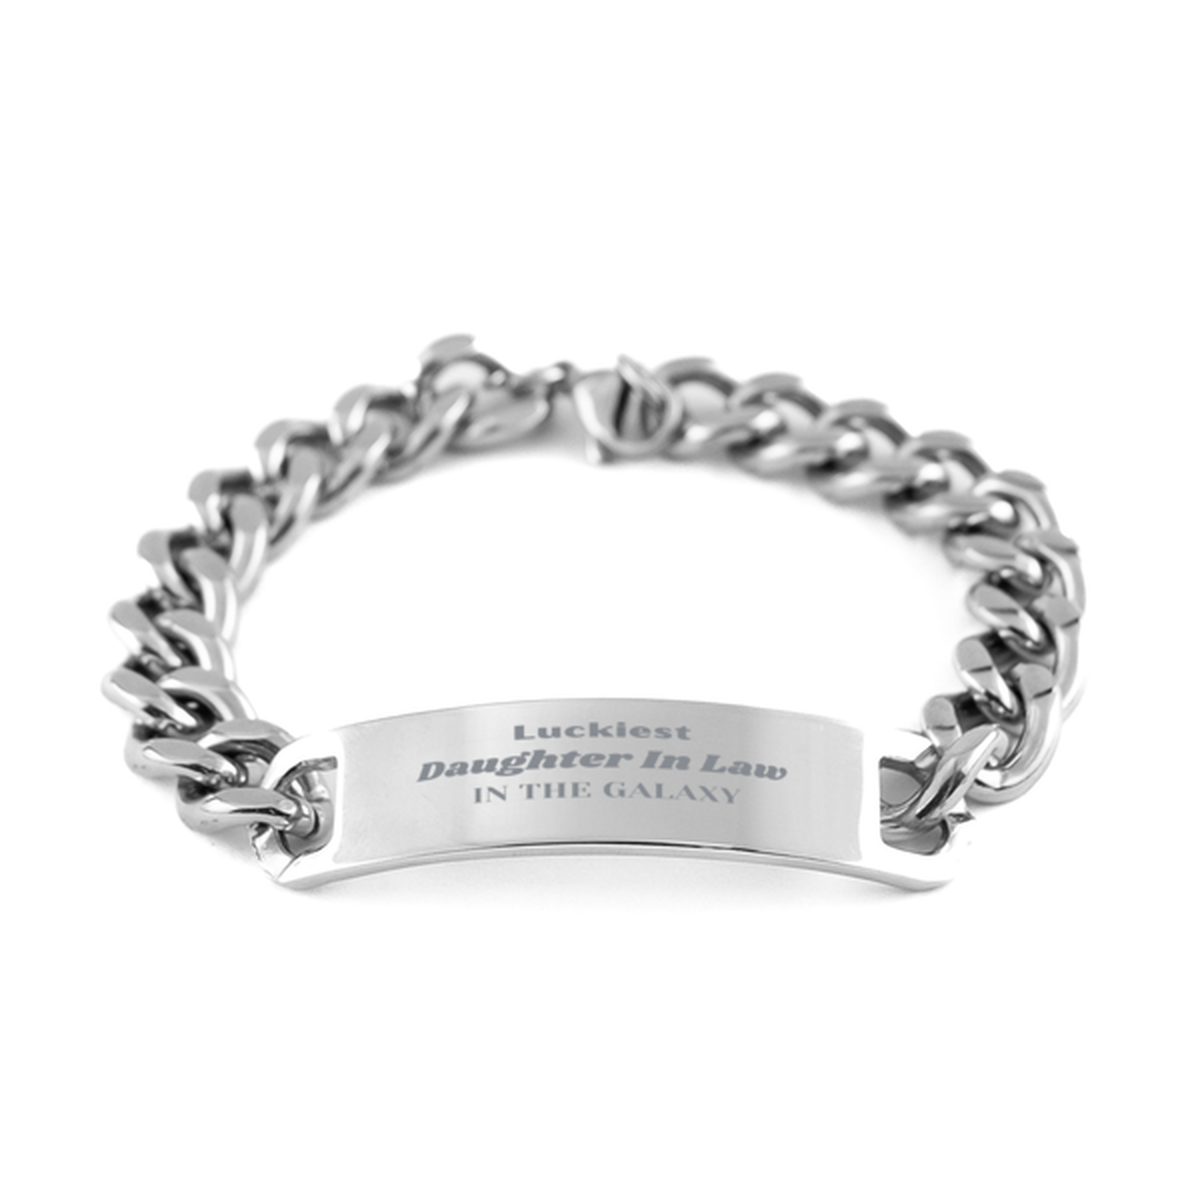 Luckiest Daughter In Law in the Galaxy, To My Daughter In Law Engraved Gifts, Christmas Daughter In Law Cuban Chain Stainless Steel Bracelet Gifts, X-mas Birthday Unique Gifts For Daughter In Law Men Women